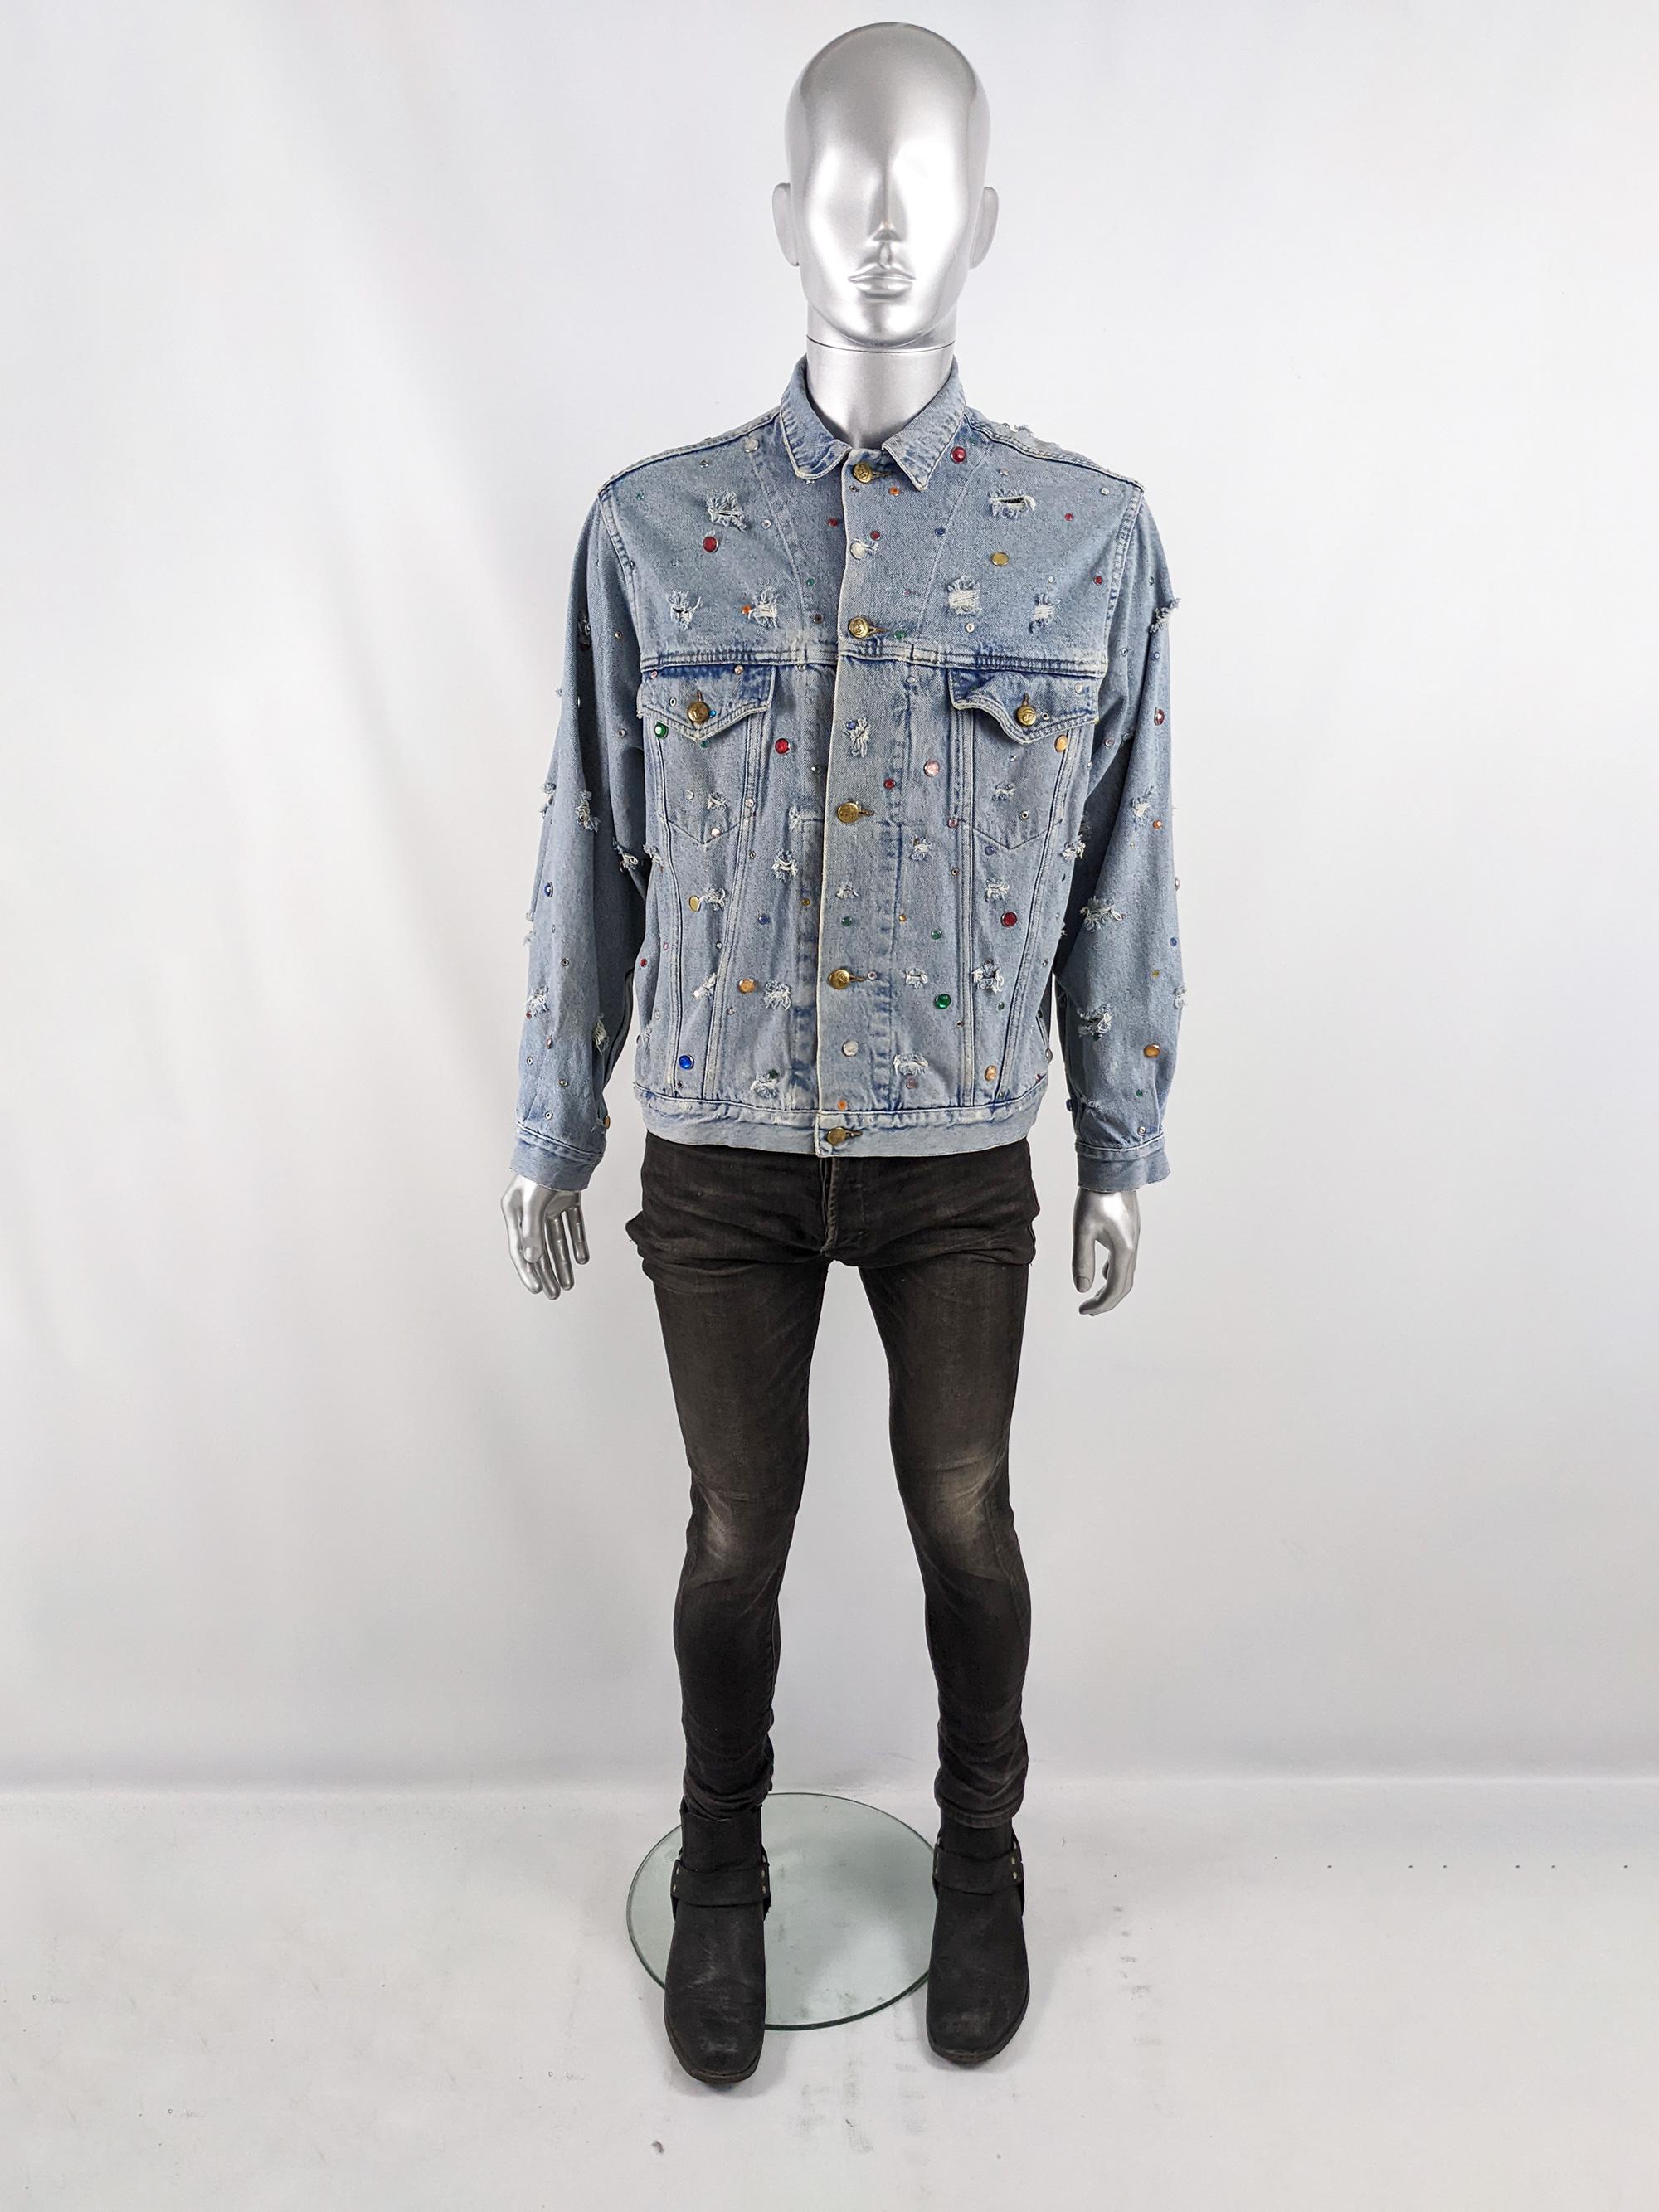 An incredible vintage mens Katherine Hamnett denim jacket from the 80s. In a blue denim with distressing / frayed rips and studs throughout (some with different coloured beads, some left unbeaded and different sizes). It has interesting buttons and